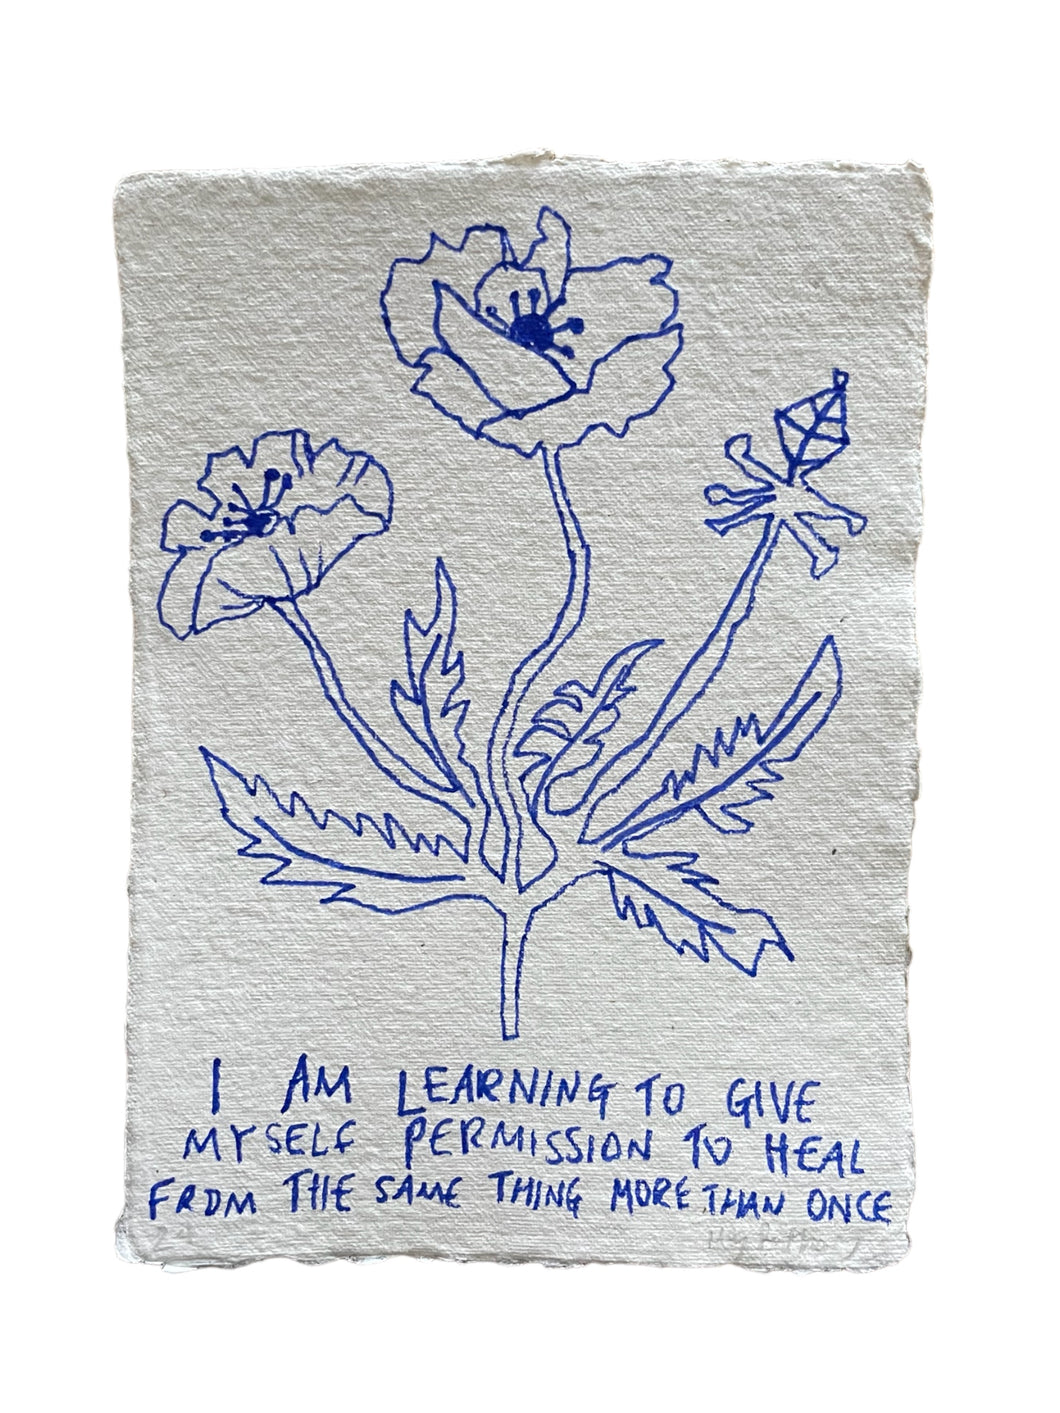 Original Ink Drawing Flower on handmade paper - I am giving myself permission to heal from the same thing more than once